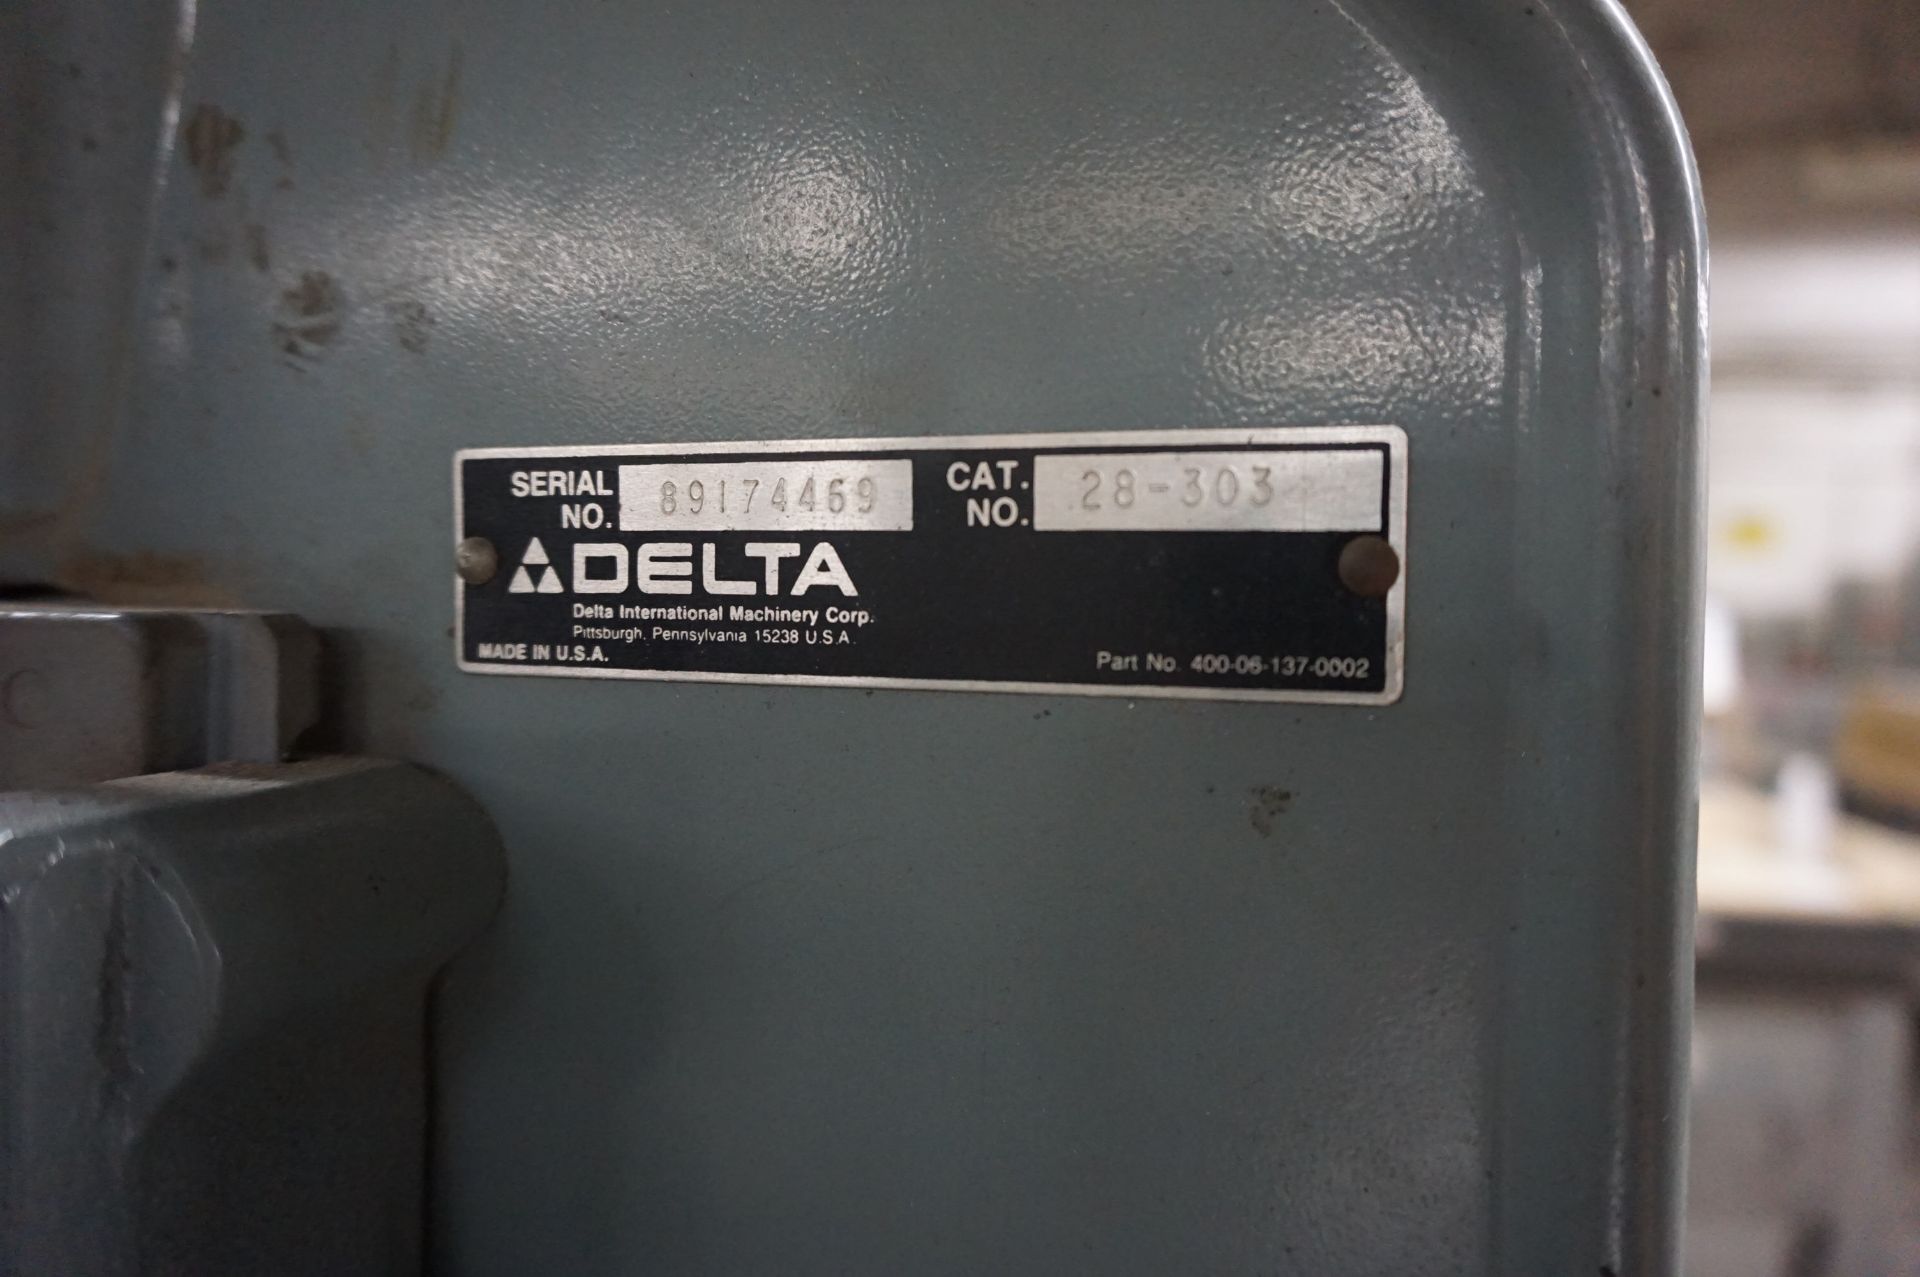 DELTA 28-303 BAND SAW S/N 89174469 **Rigging provided exclusively by Golden Bear Services. Loading - Image 4 of 4